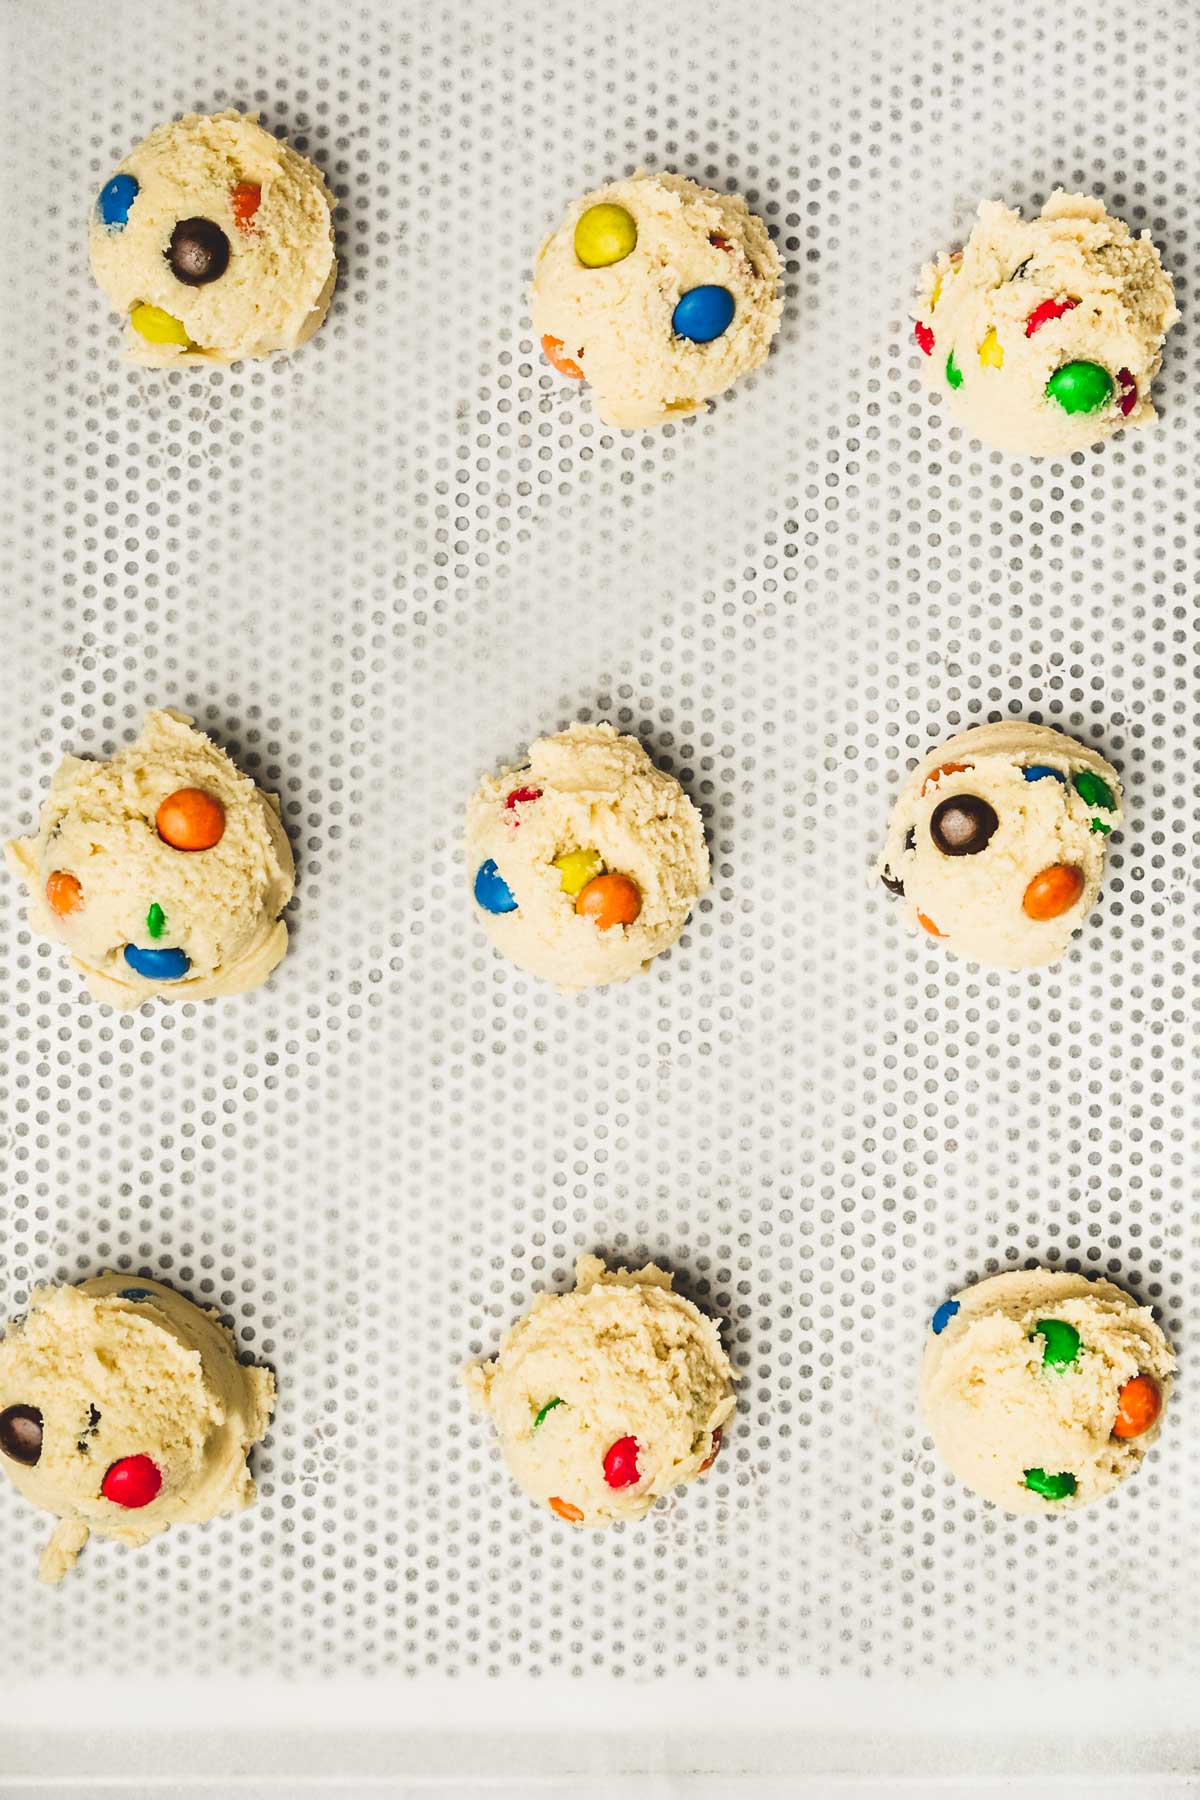 Ball of m&m's cookie dough on a baking sheet